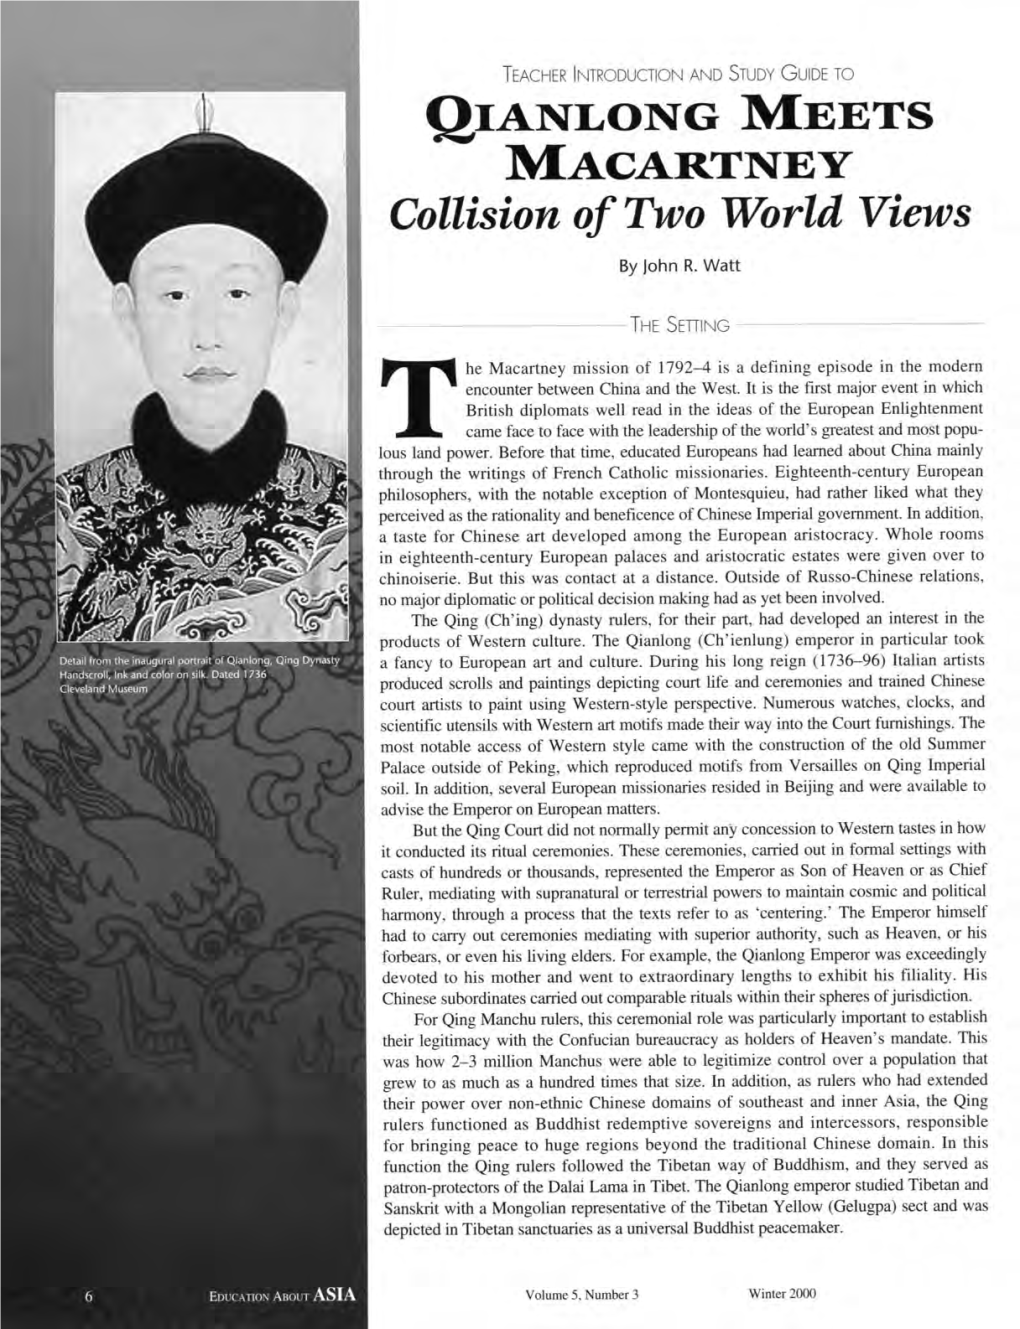 Qianlong Meets Macartney: Collision of Two World Views Grade Level: 9-12 Approximate Class Time: from One Hour to Ninety Minllles (Play Takes Approx